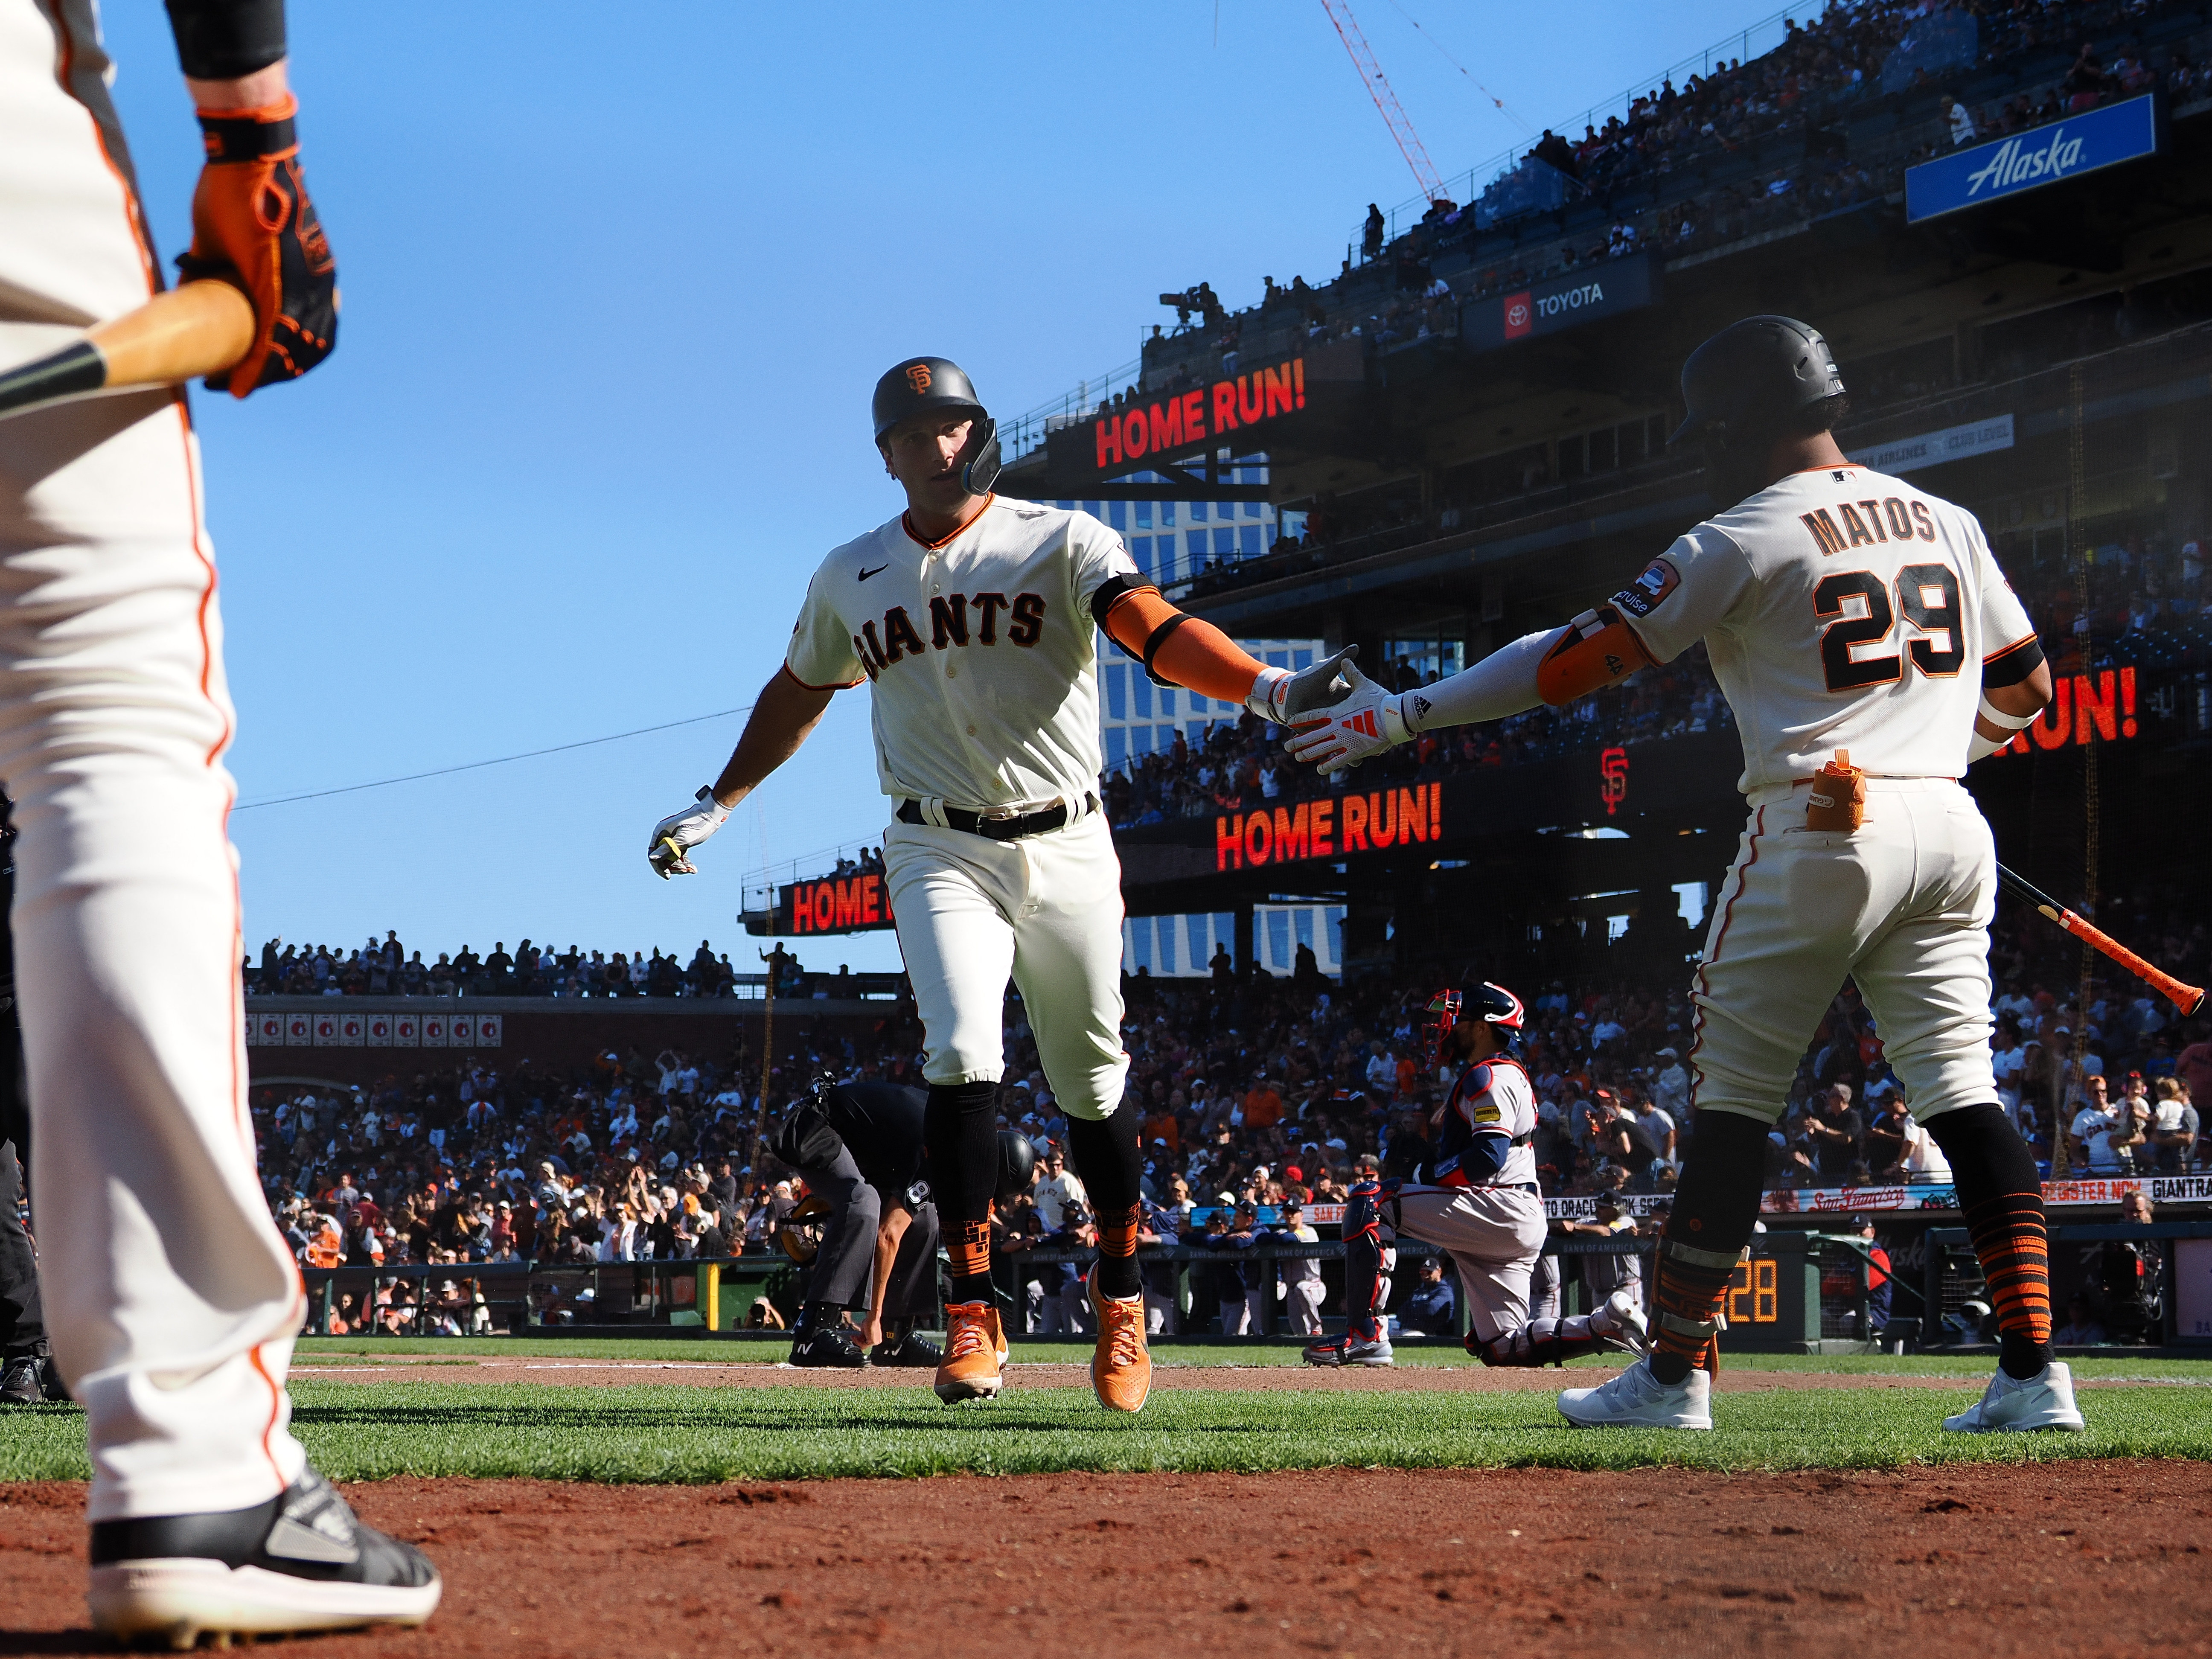 Giants stage comeback, force extra innings, avoid the sweep